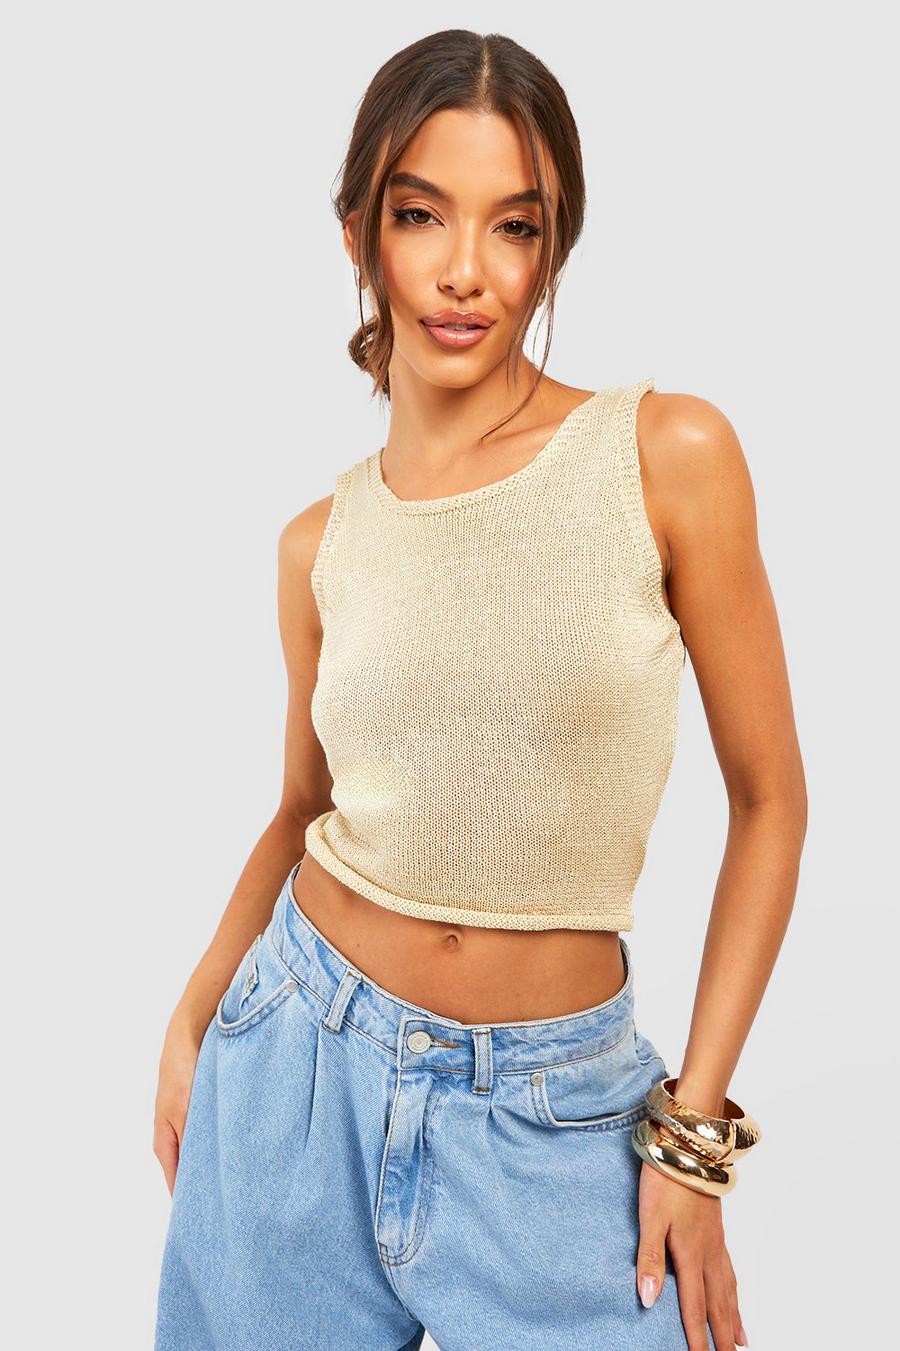 Women's Basic Corset Style Tank Top Cropped Stretch Soft Knit